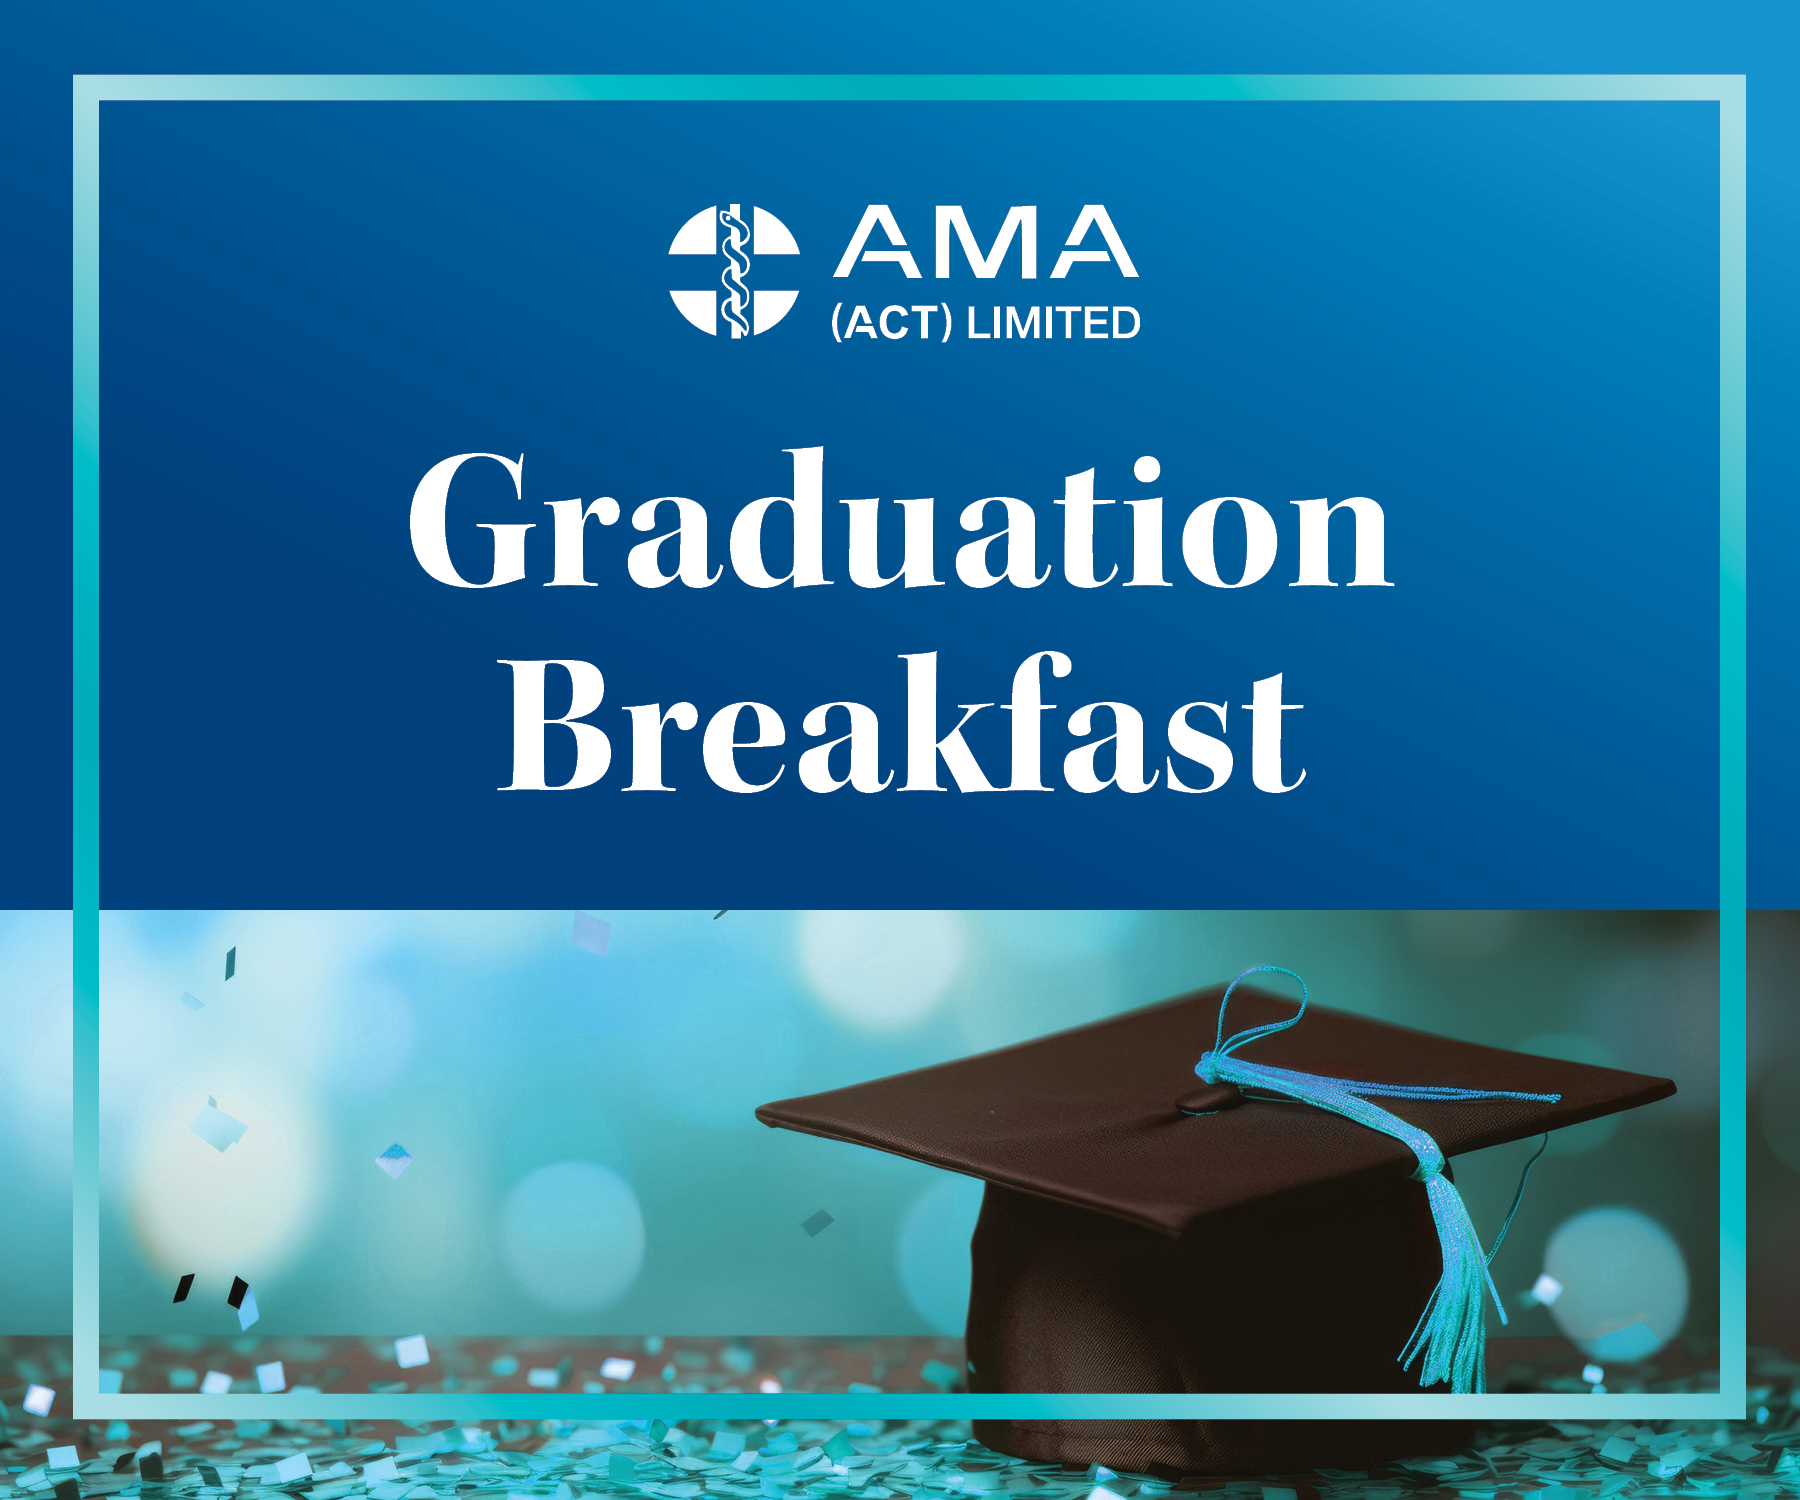 A graduation cap surrounded by a blue background and the words Graduation Breakfast, with the AMA logo.